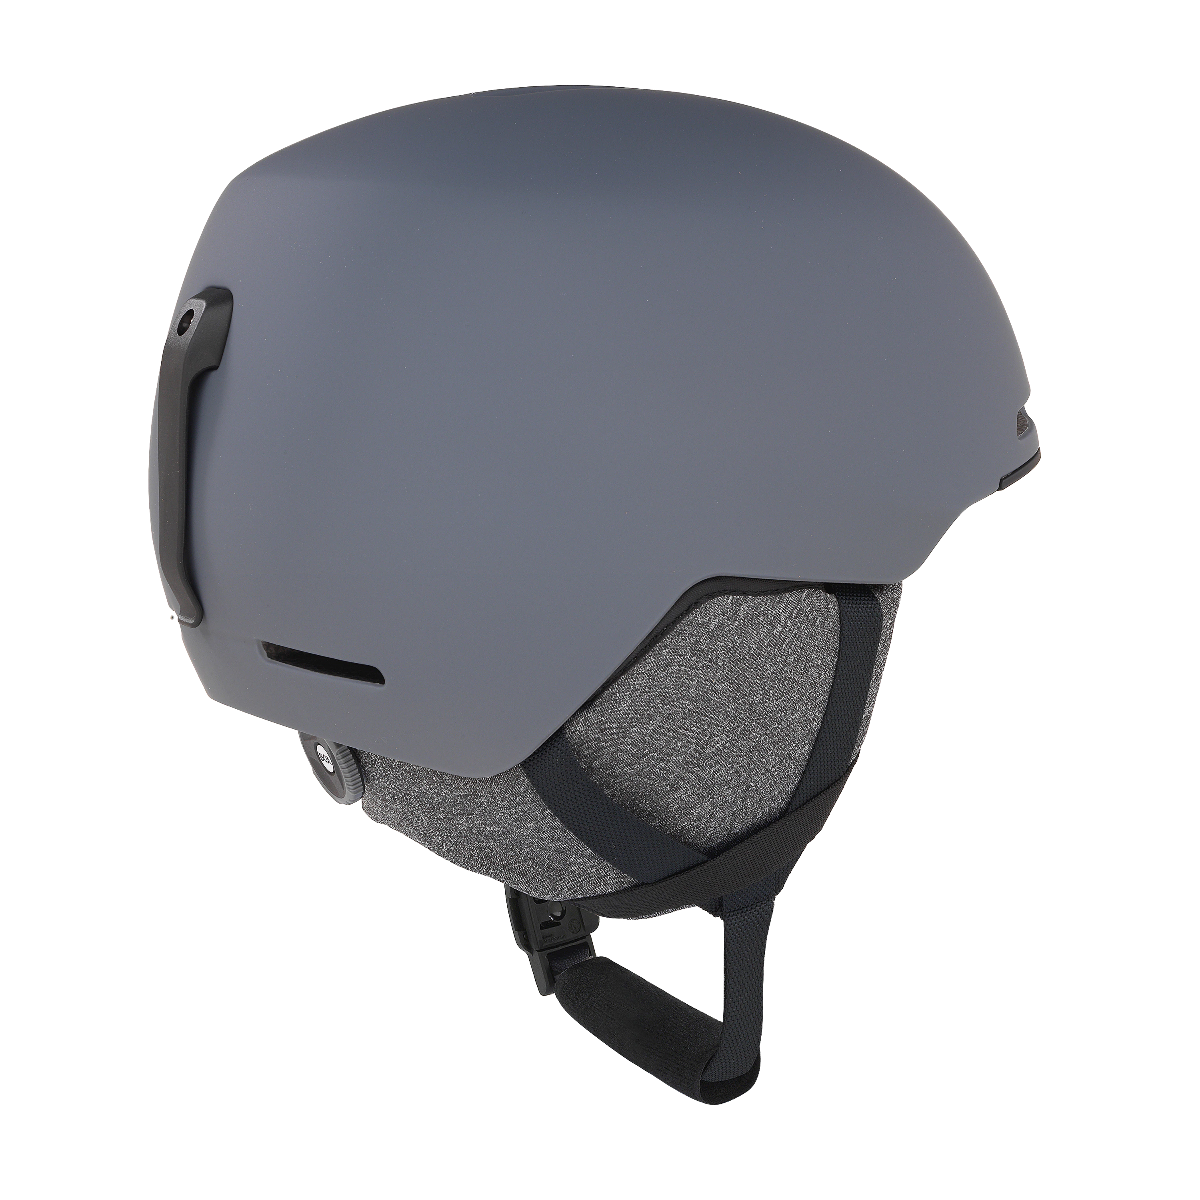 Oakley Mod1 helm forged iron